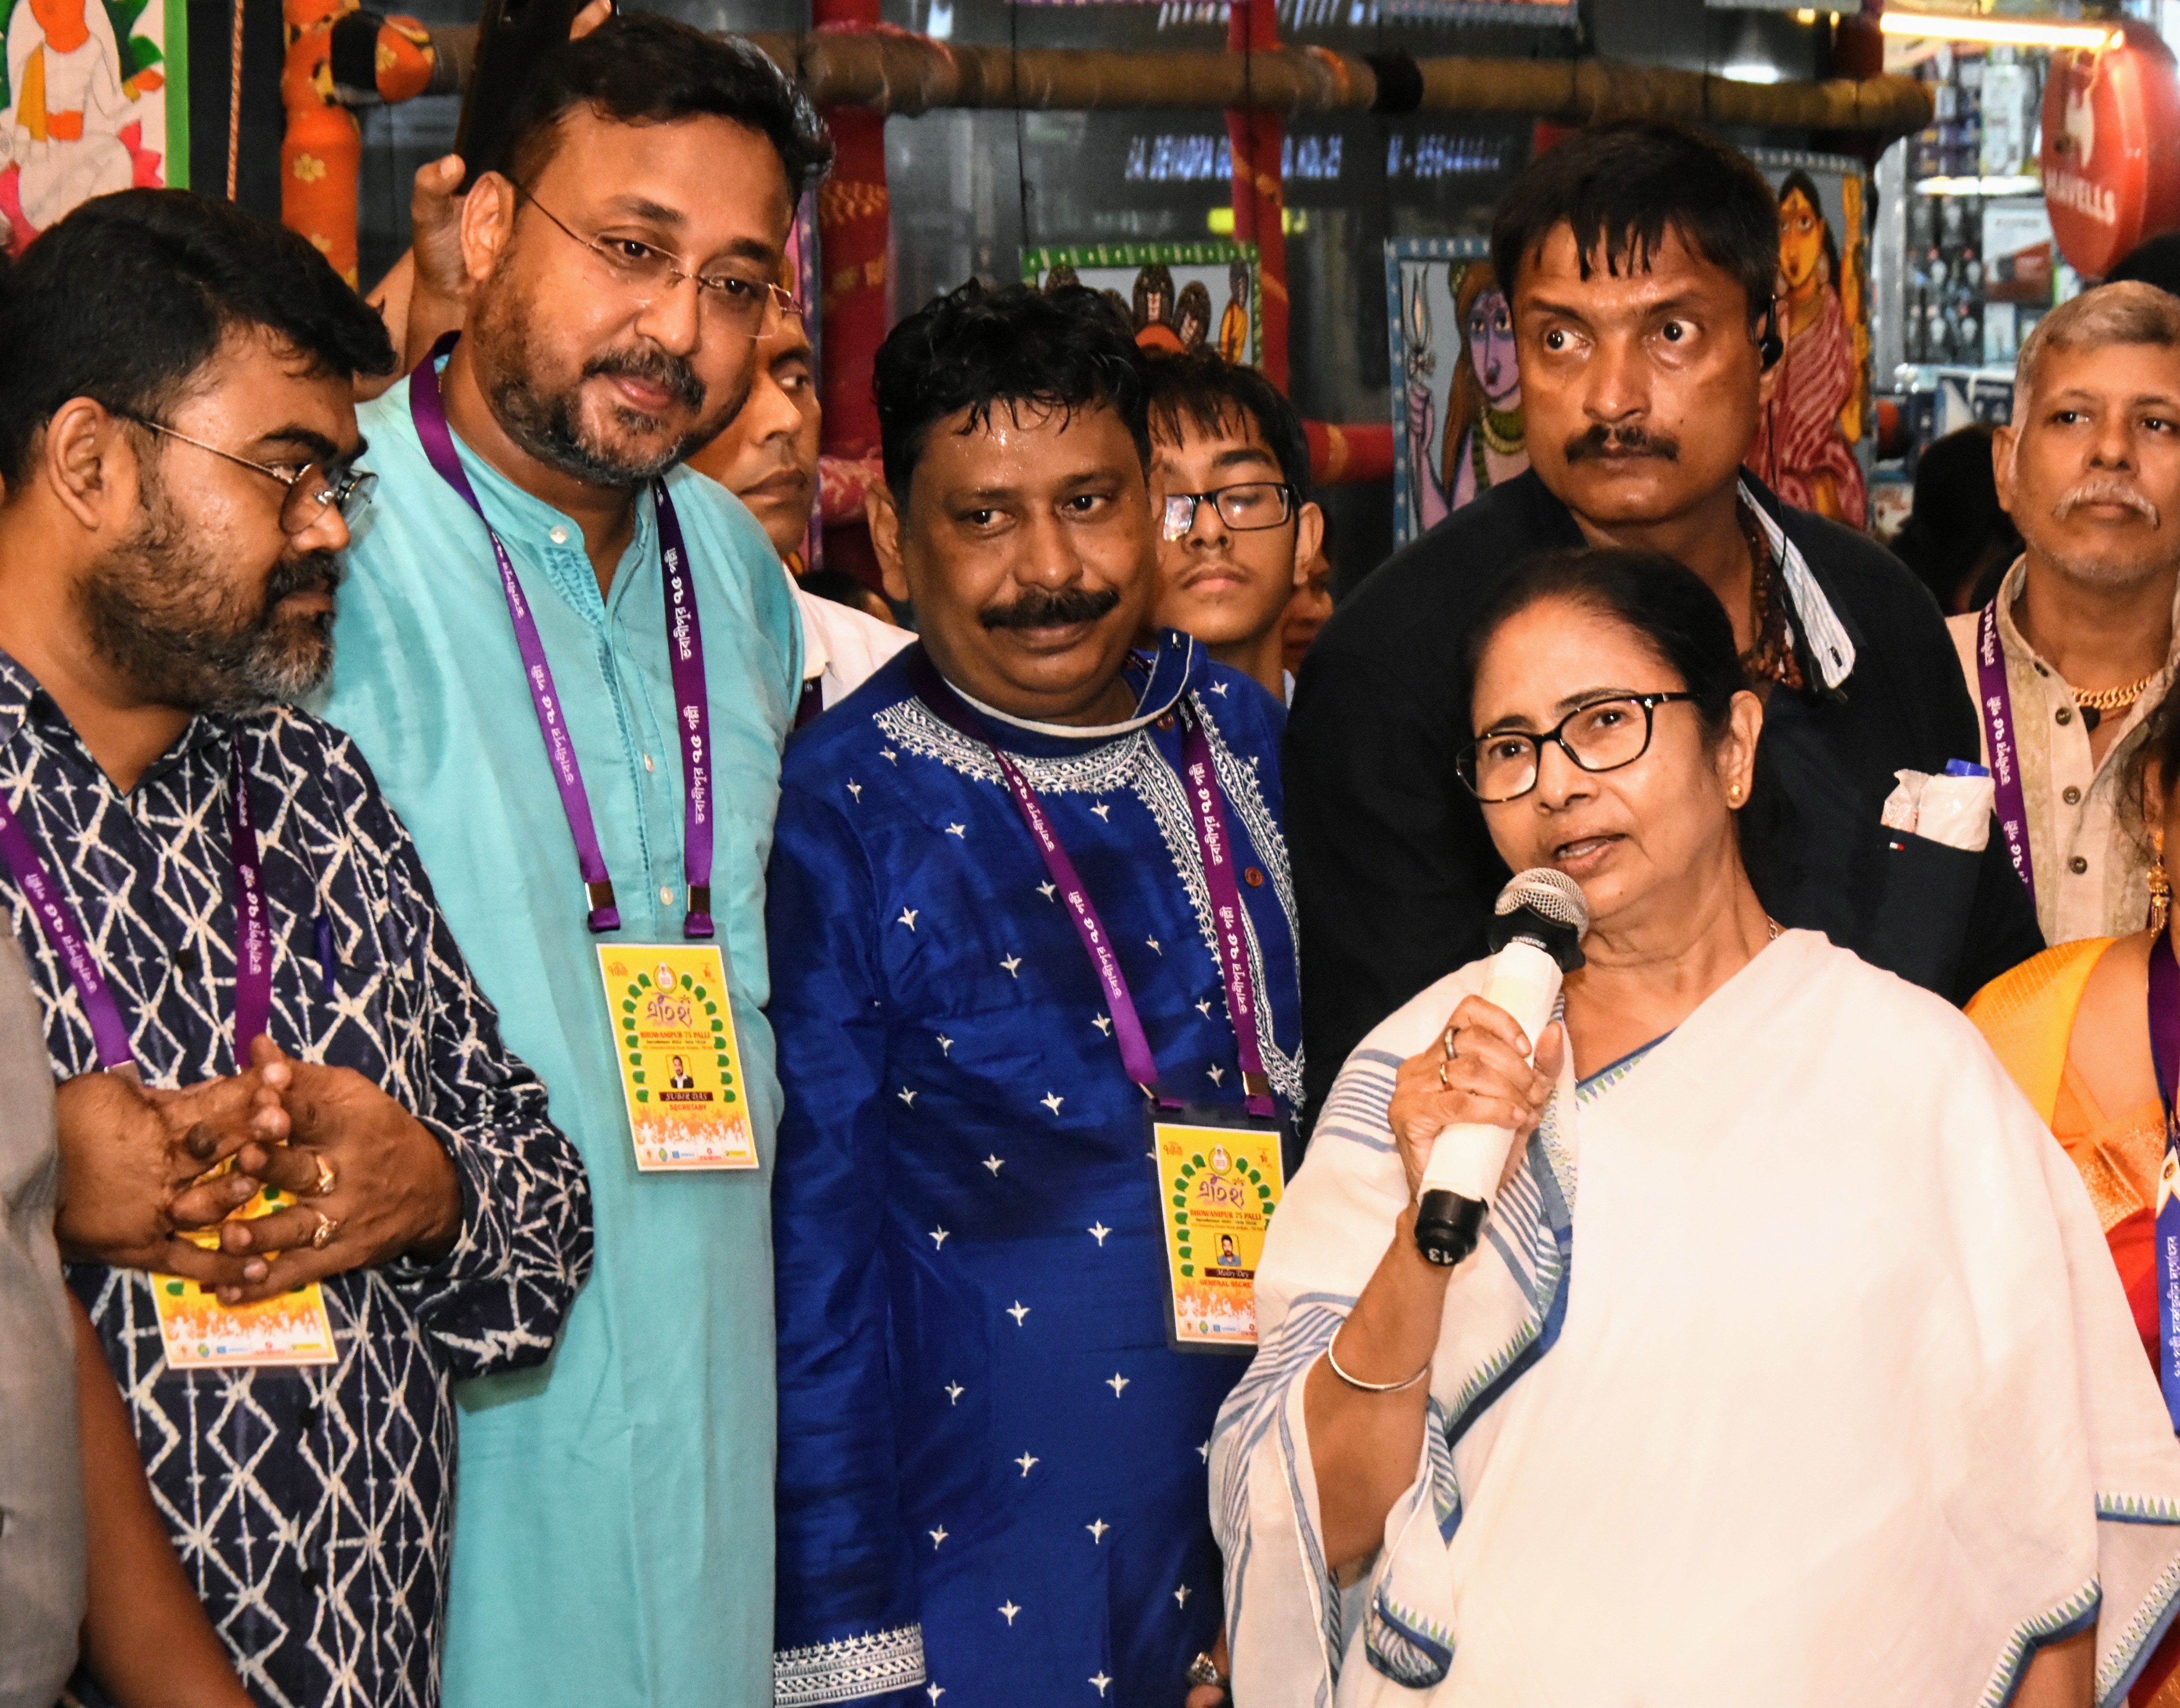 Mamata Banerjee inaugurates  Bhowanipur 75 Palli with its theme ‘Aitijhya Beche Thakuk’ – ‘Let the Heritage Live’ to uplift the morale of the rich culture of West Bengal for Durga Puja